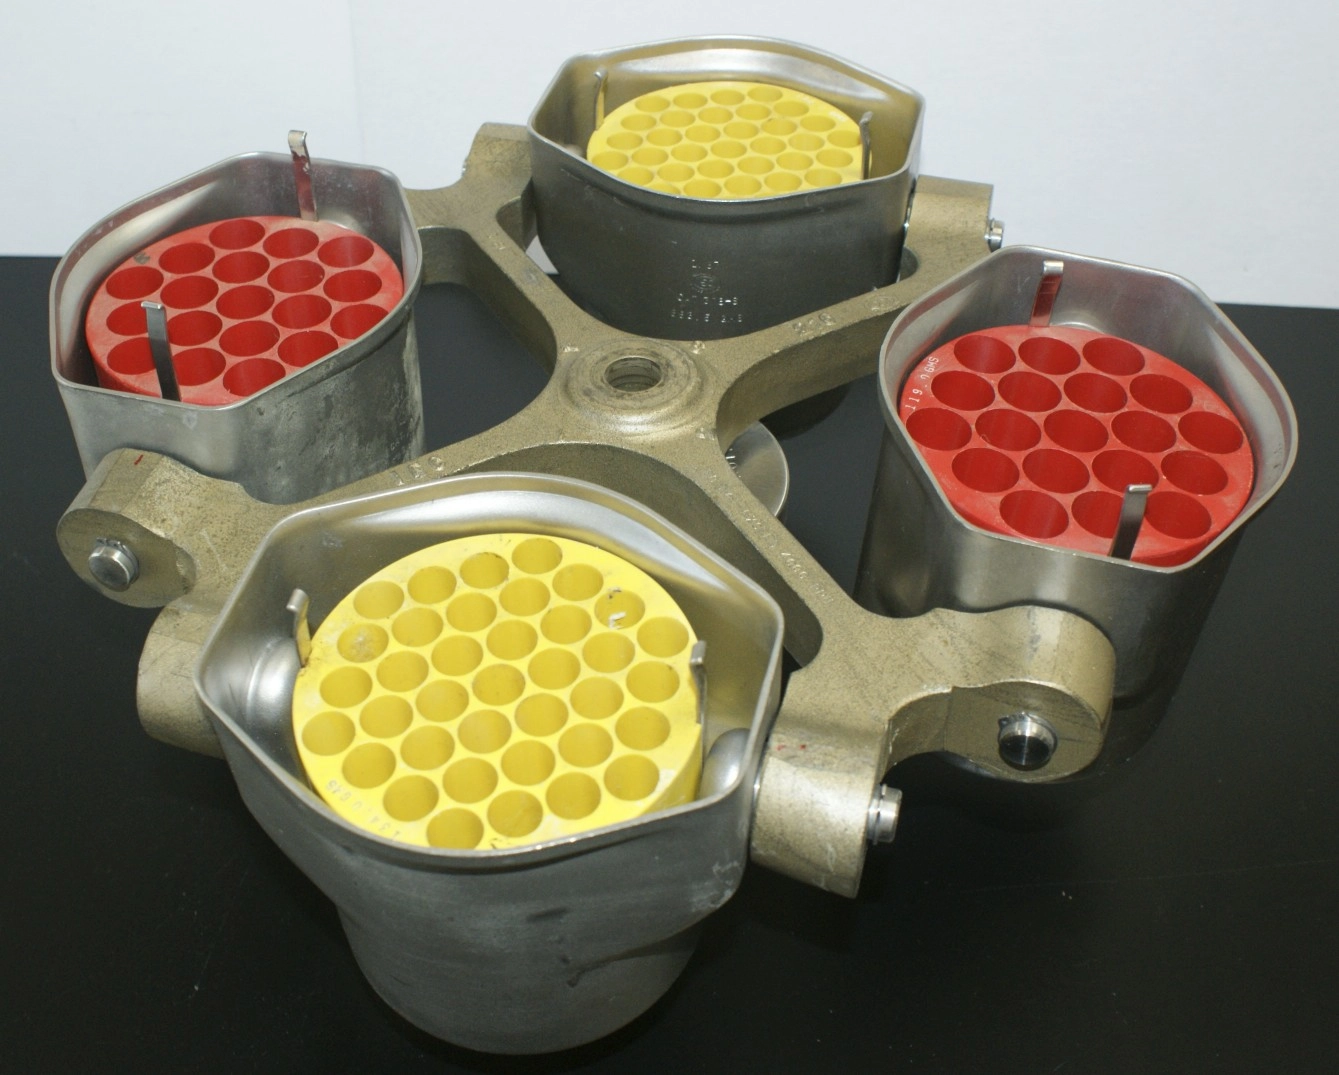 IEC 216 Swing Bucket Rotor with 378 buckets with yellow 37 place inserts and red 19 place inserts Rotor used